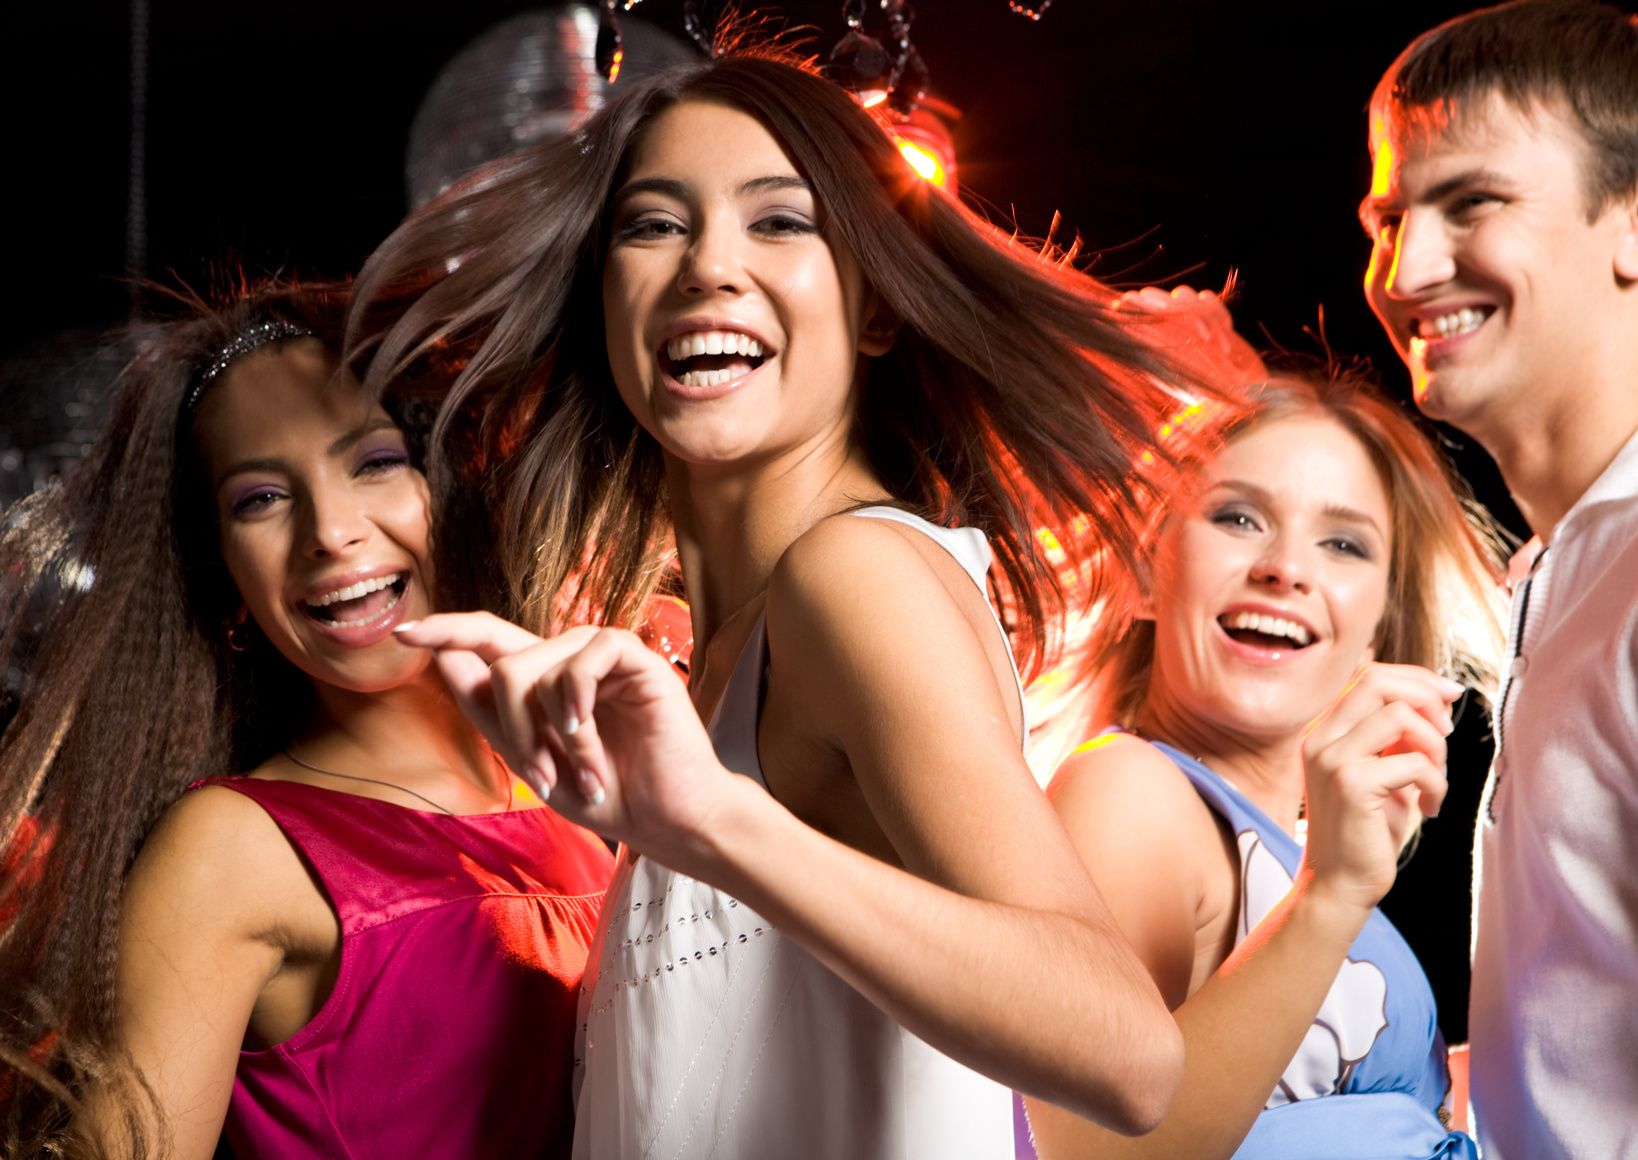 Portrait of laughing girl wearing white dress dancing among her friends